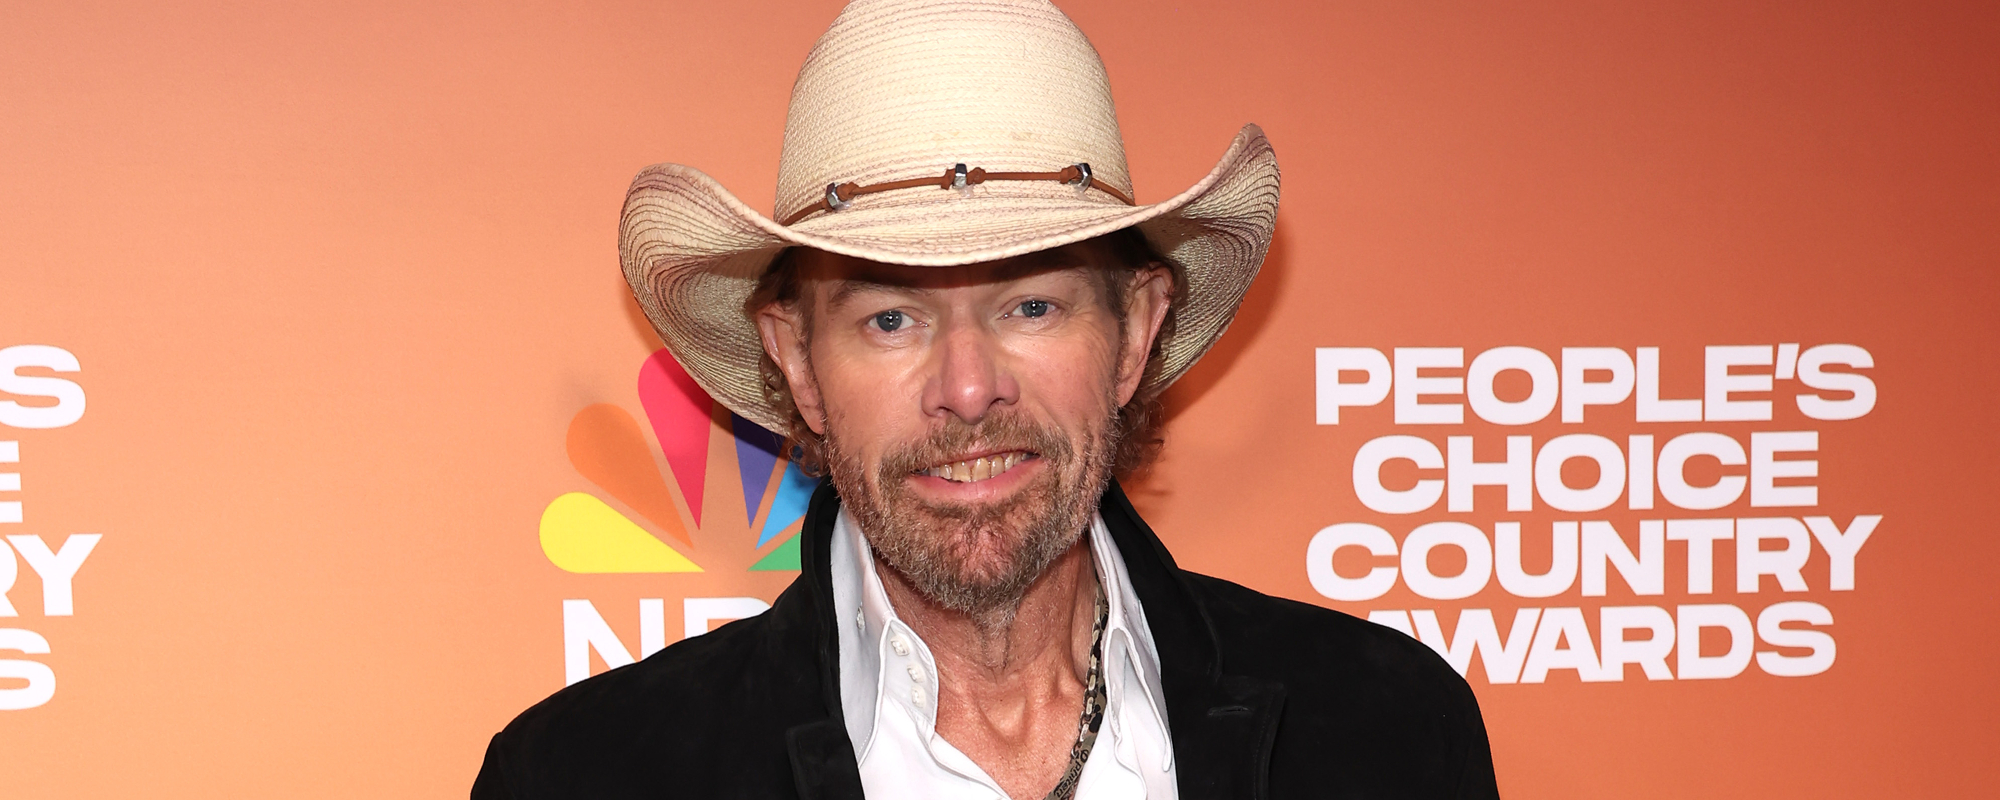 Watch: Toby Keith Goes Behind the Scenes of Return Performance at People’s Choice Country Awards